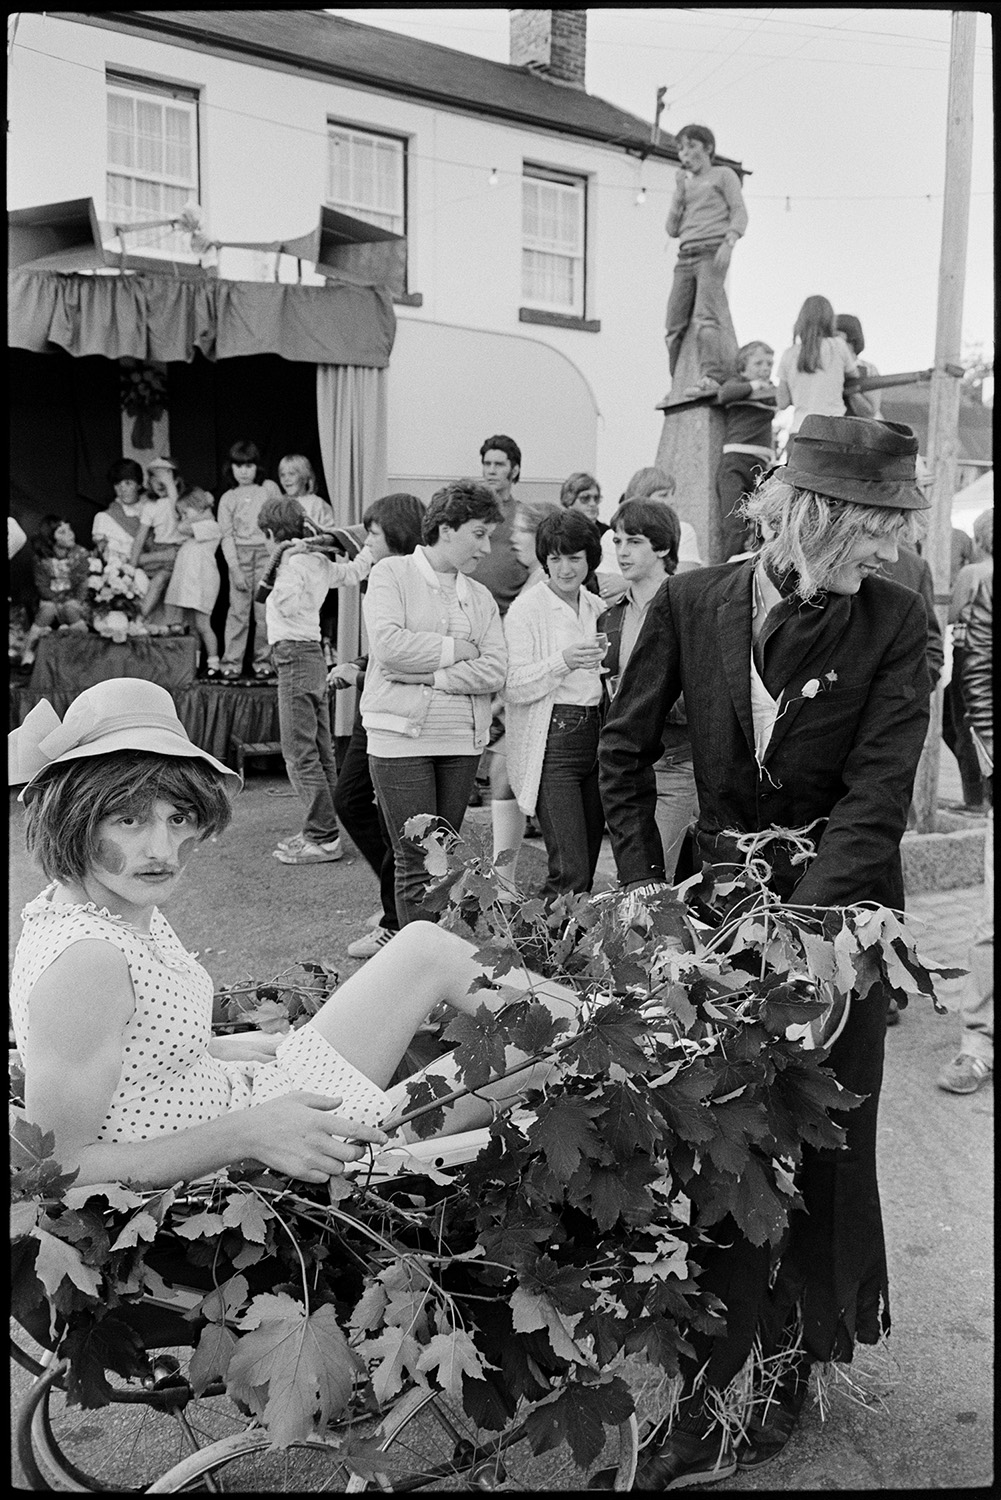 Fancy dress, pram race around village.
[Contestants in fancy dress waiting for the start of the pram race at Winkleigh Fair. One entry has an old pram covered in leaves. People are talking and watching in the background, by the podium for the Fair Queen and a boy stood on a stone pillar to get a better view.]